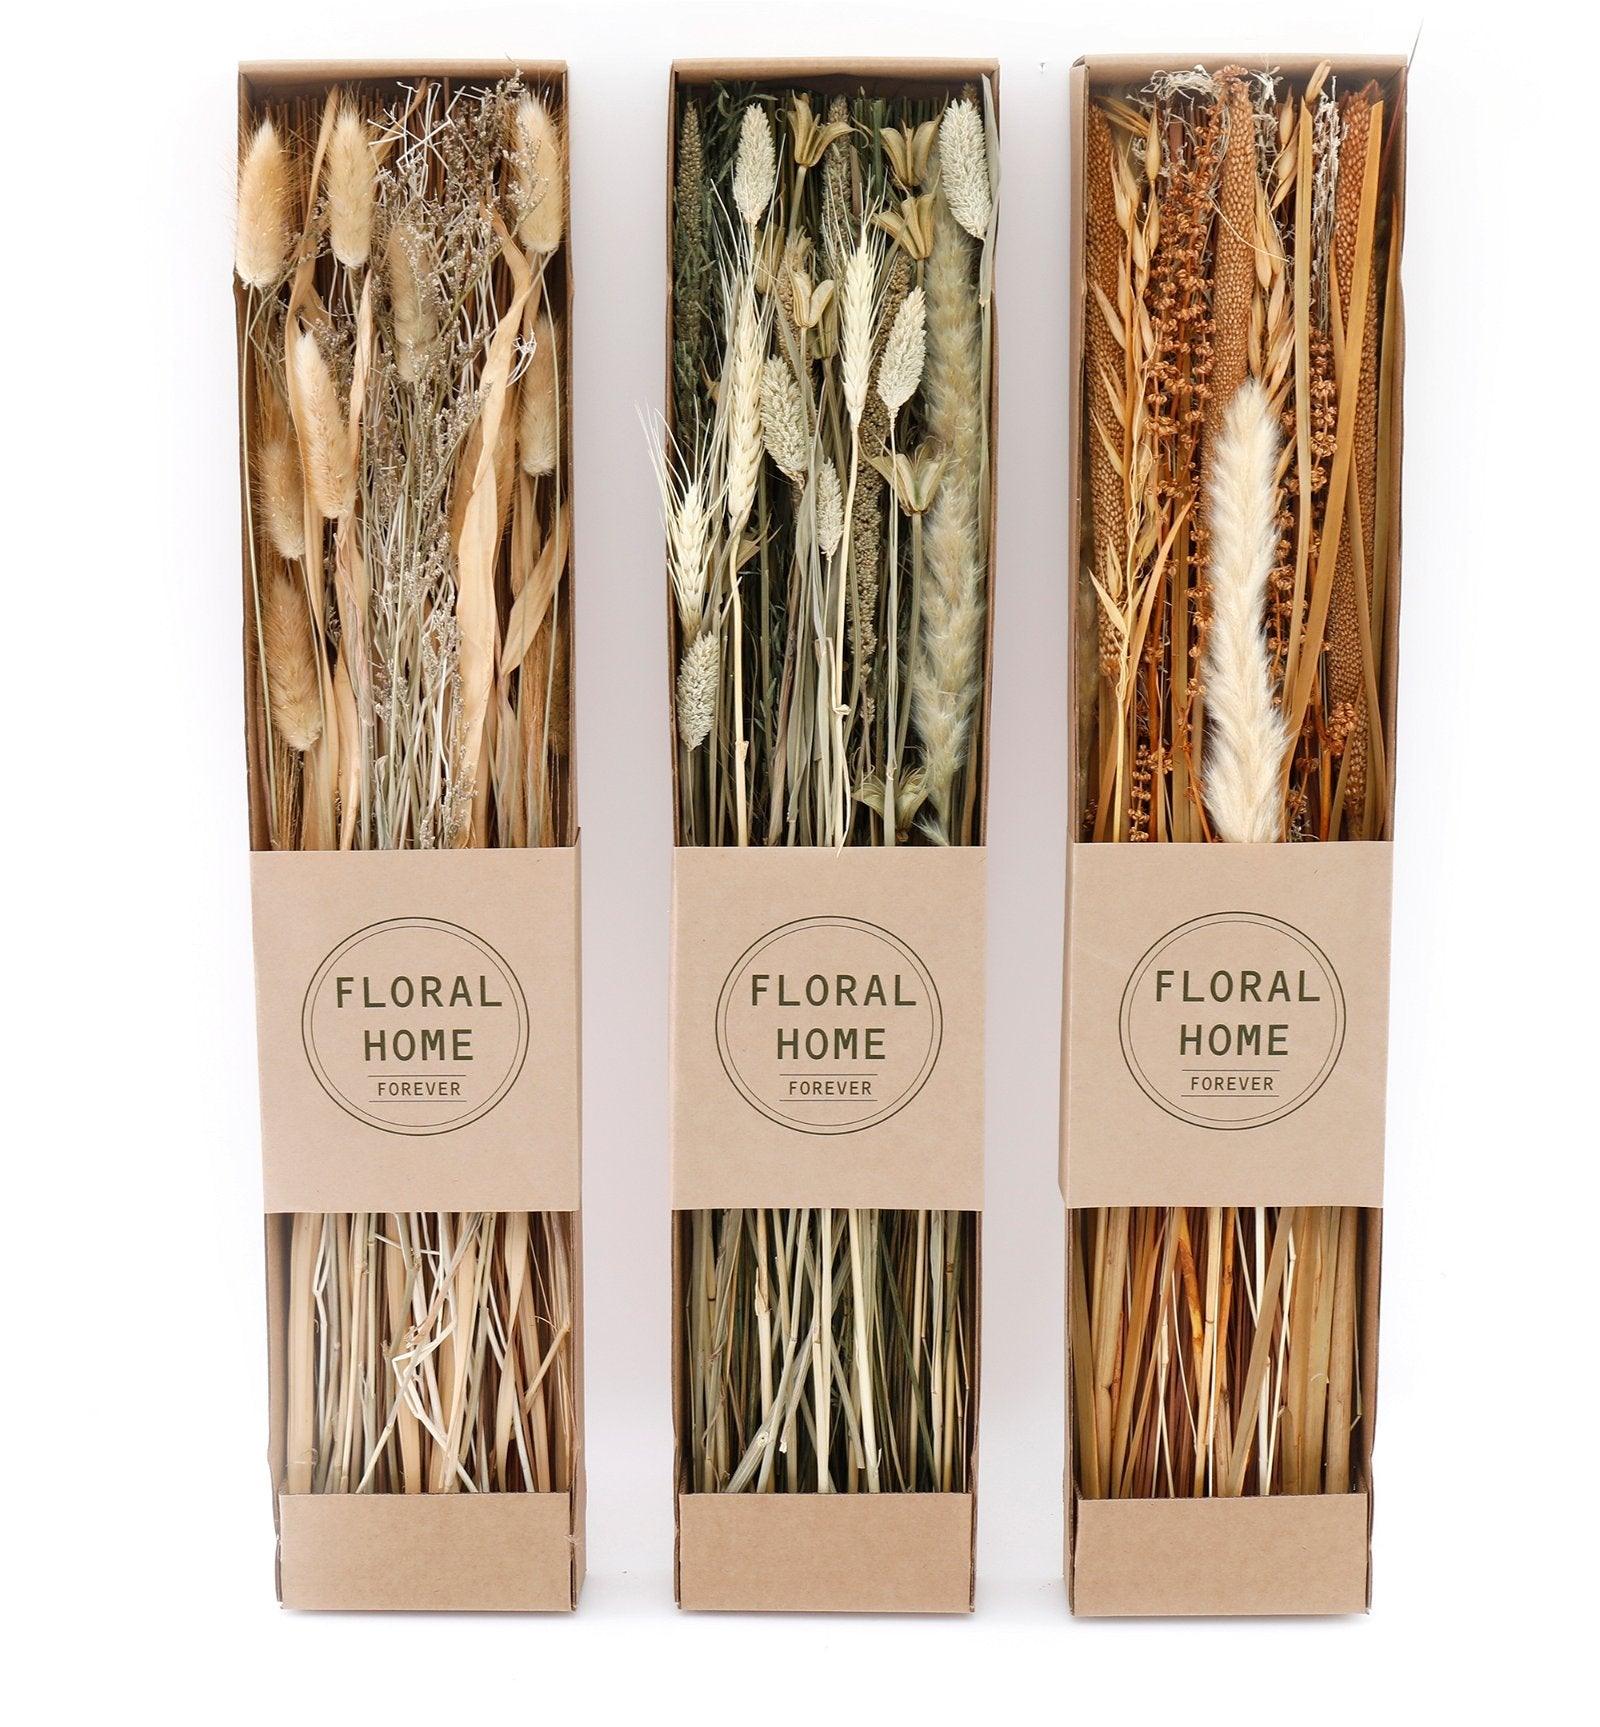 View Set of 3 Dried Grasses in Display Box information